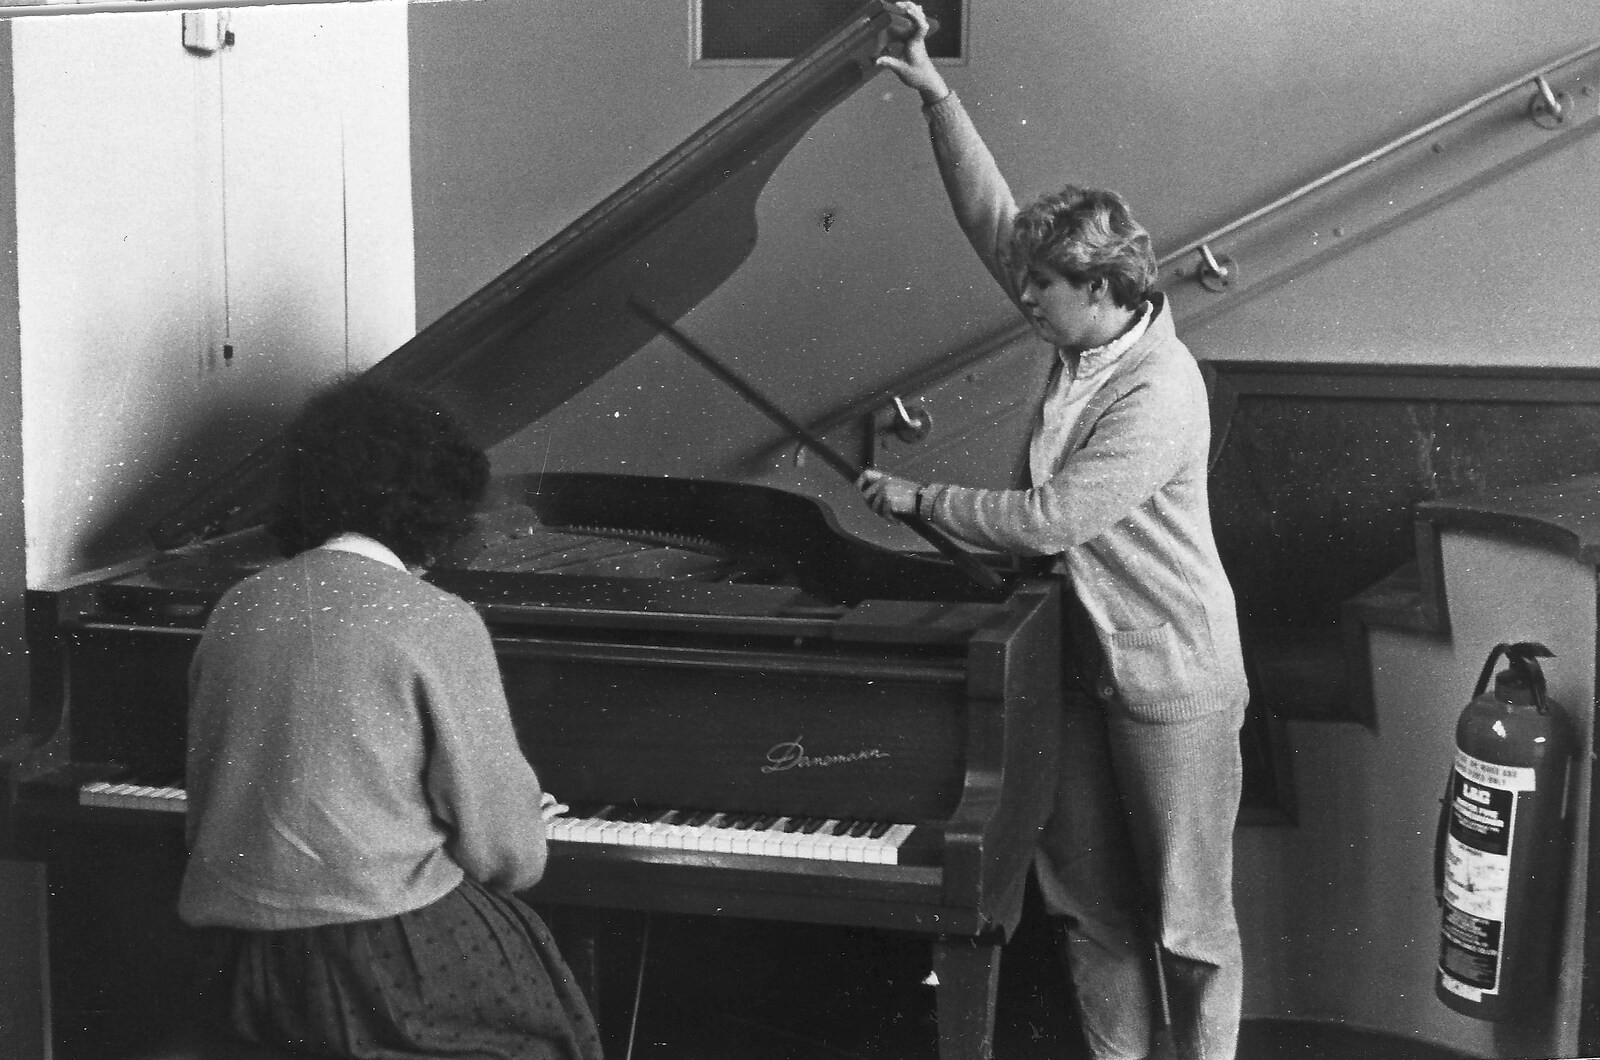 Liz plays piano as Anna puts the lid up from Learning Black-and-White Photography, Brockenhurst College, Hampshire - 10th March 1985